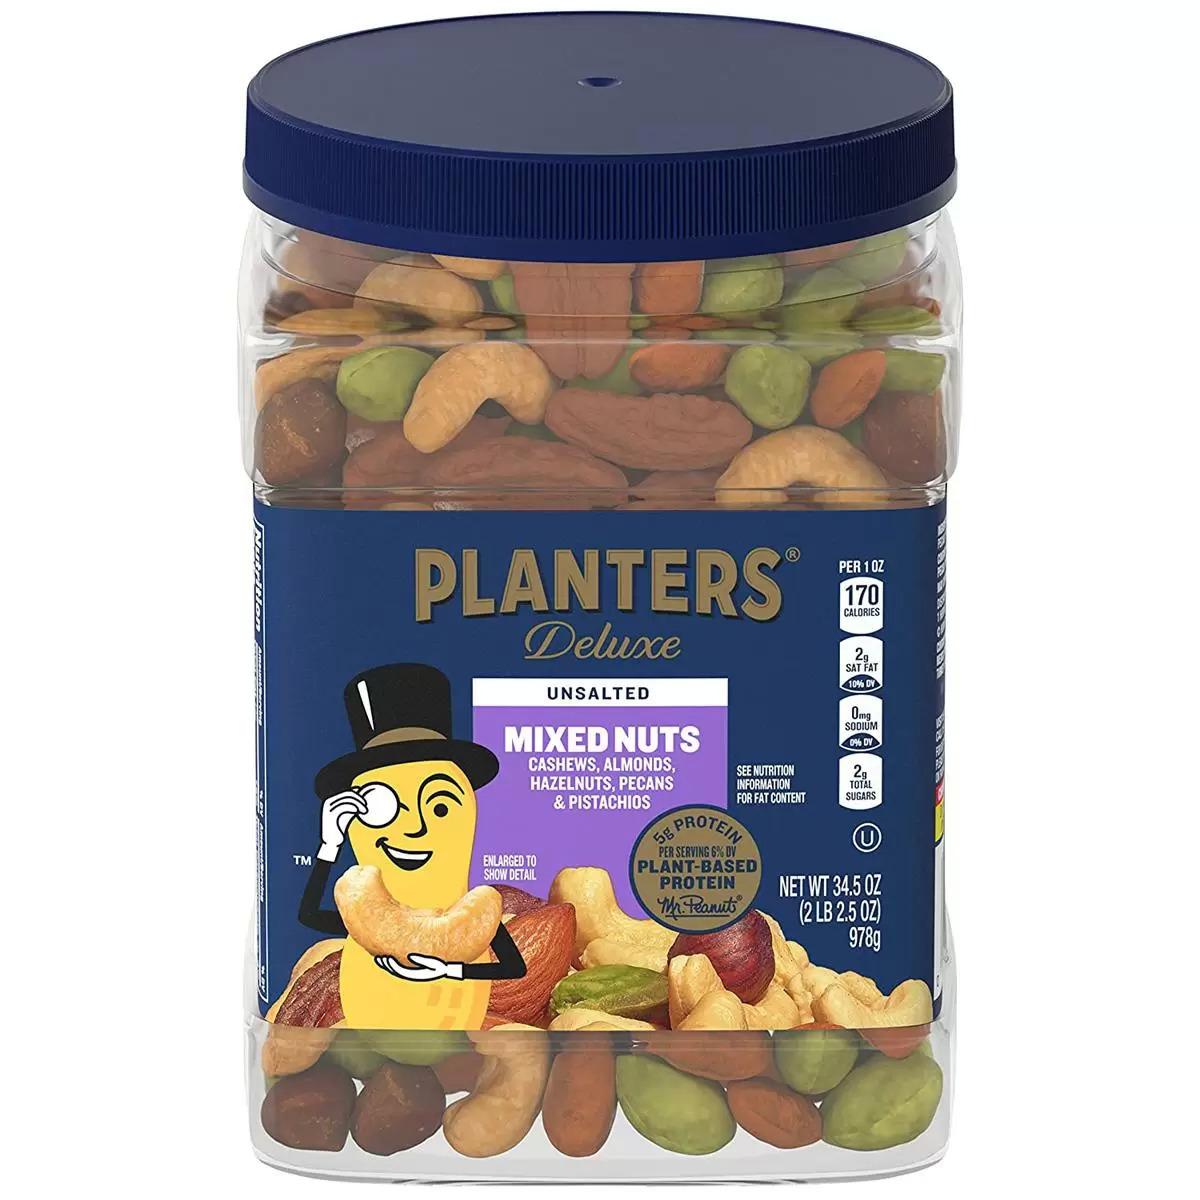 Planters Deluxe Mixed Nuts Unsalted for $12.65 Shipped